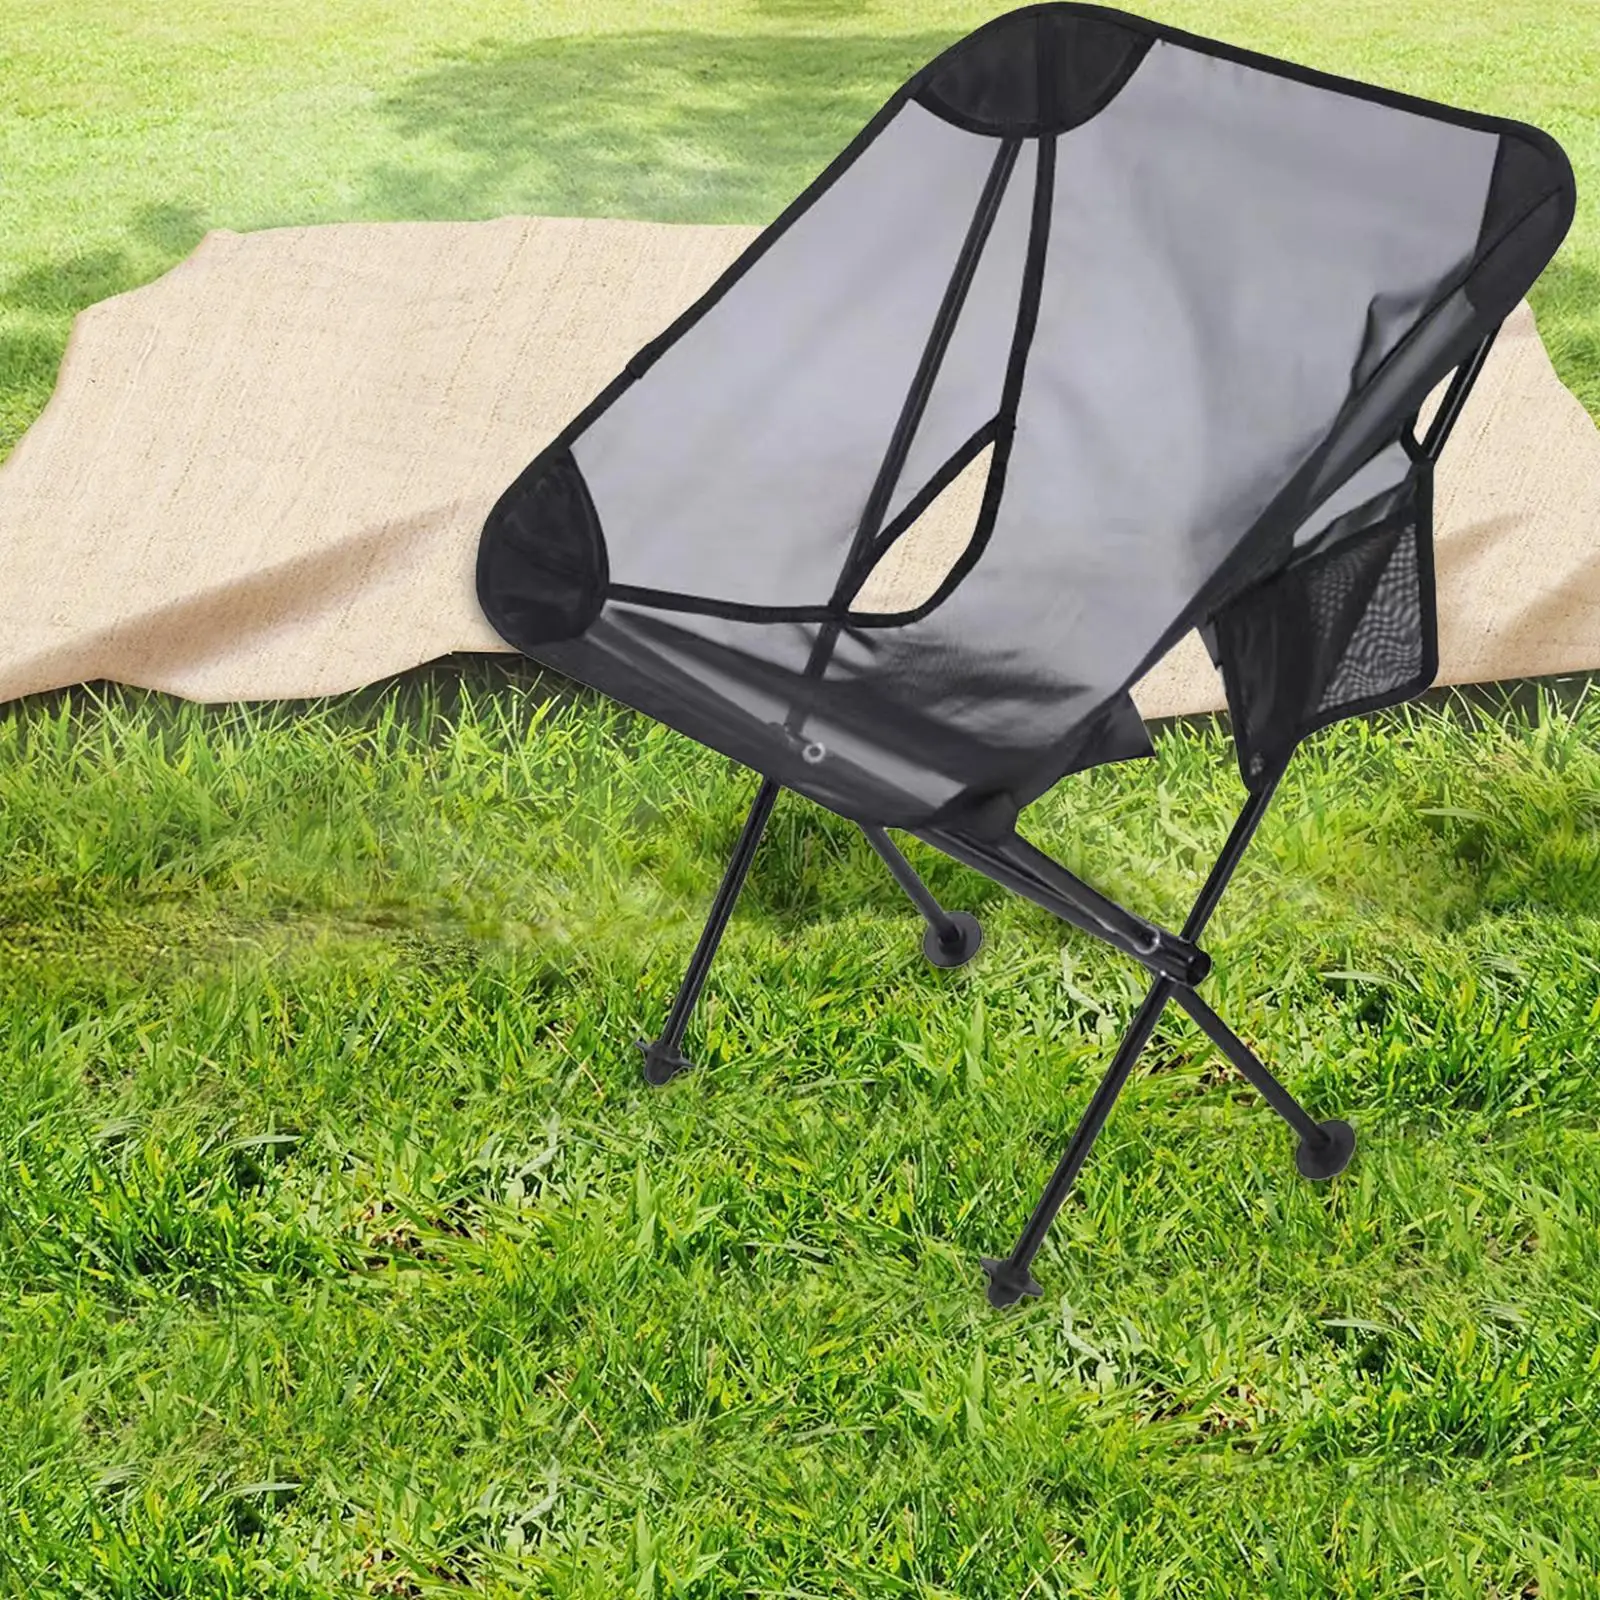 Folding Camping Chair for Outdoor Portable Parks Garden Travels Hiking Practical Backyard Campings Accessory Outdoor Moon Chair